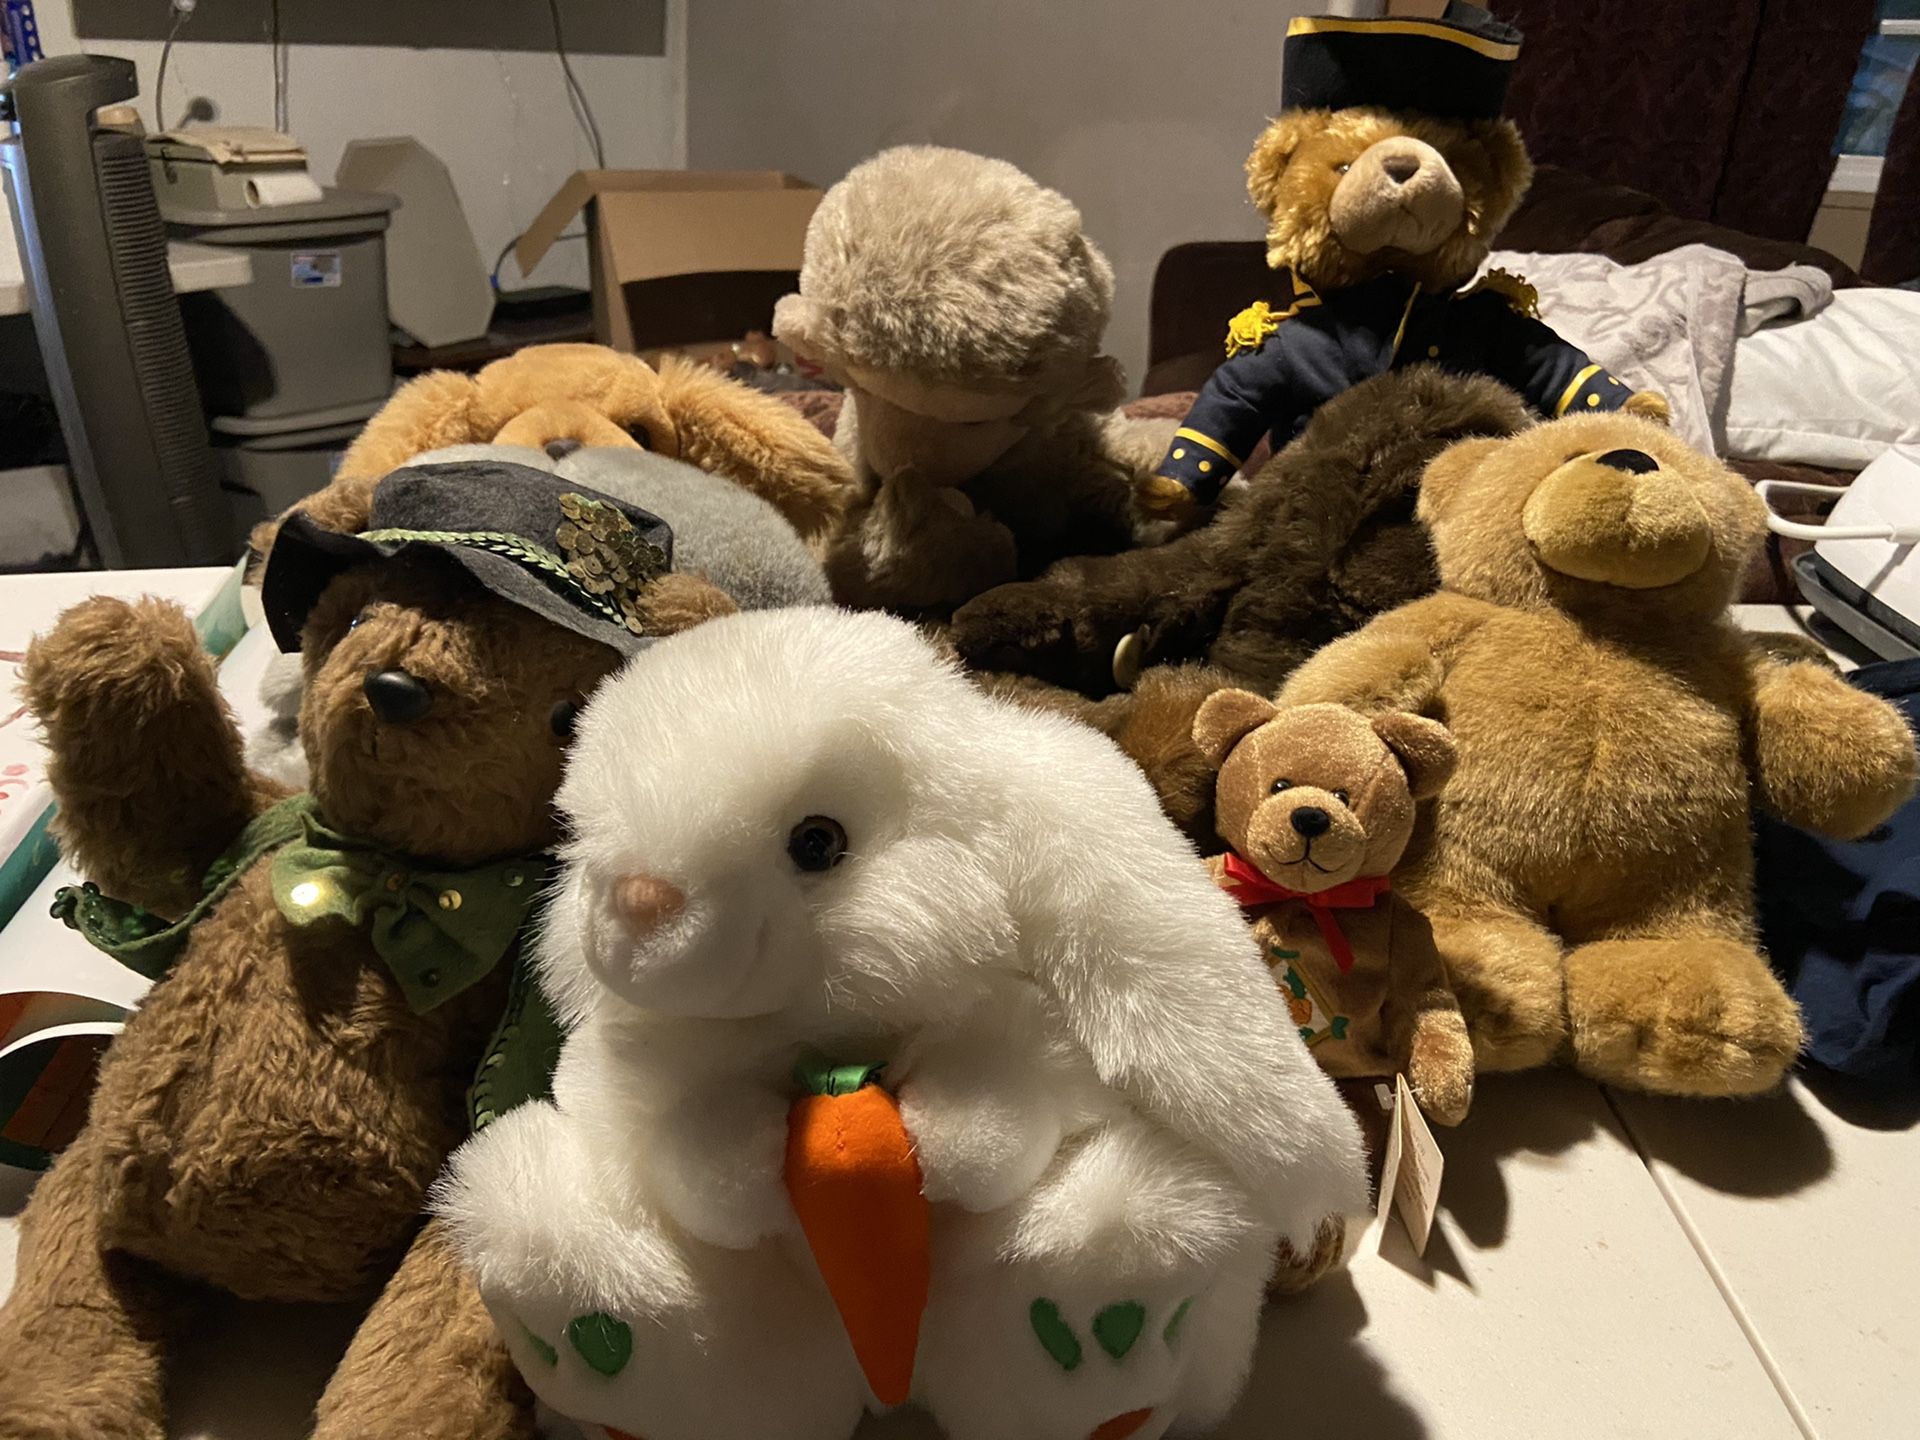 Vintage teddy bears and plushies